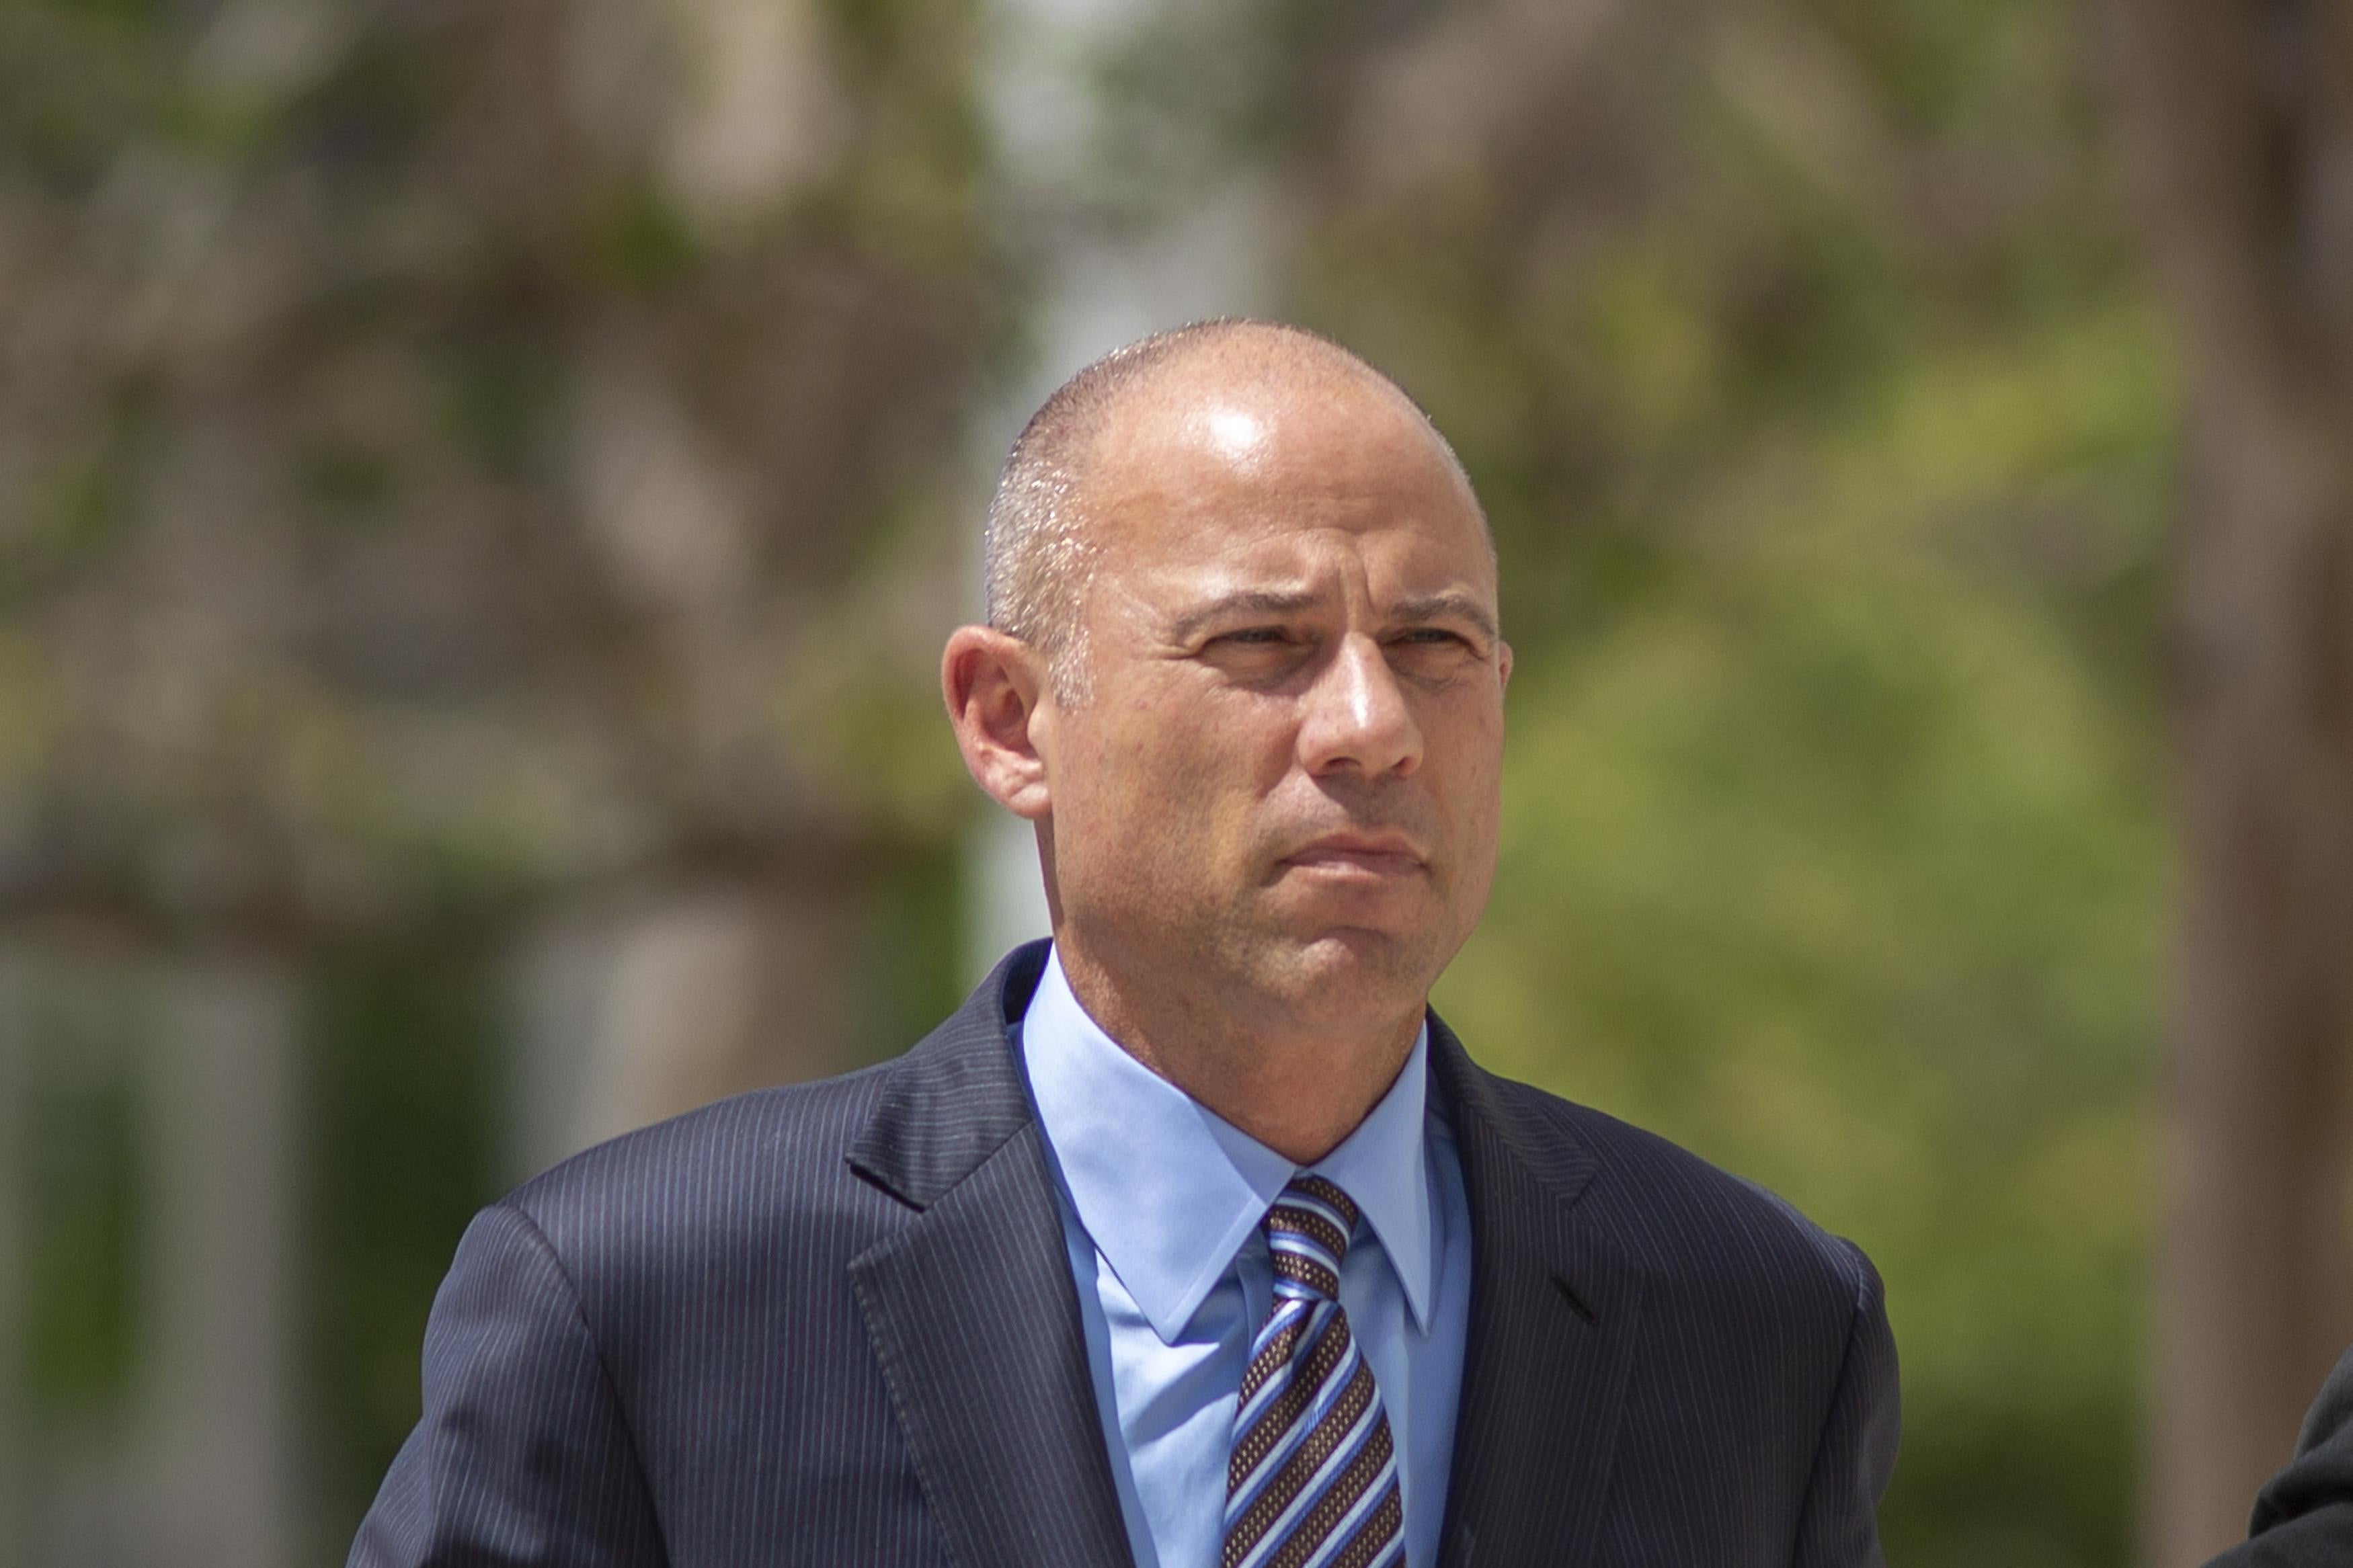 Michael Avenatti arrives for his first hearing in Santa Ana federal court on bank and wire fraud charges on April 1, 2019 in Santa Ana, California. 